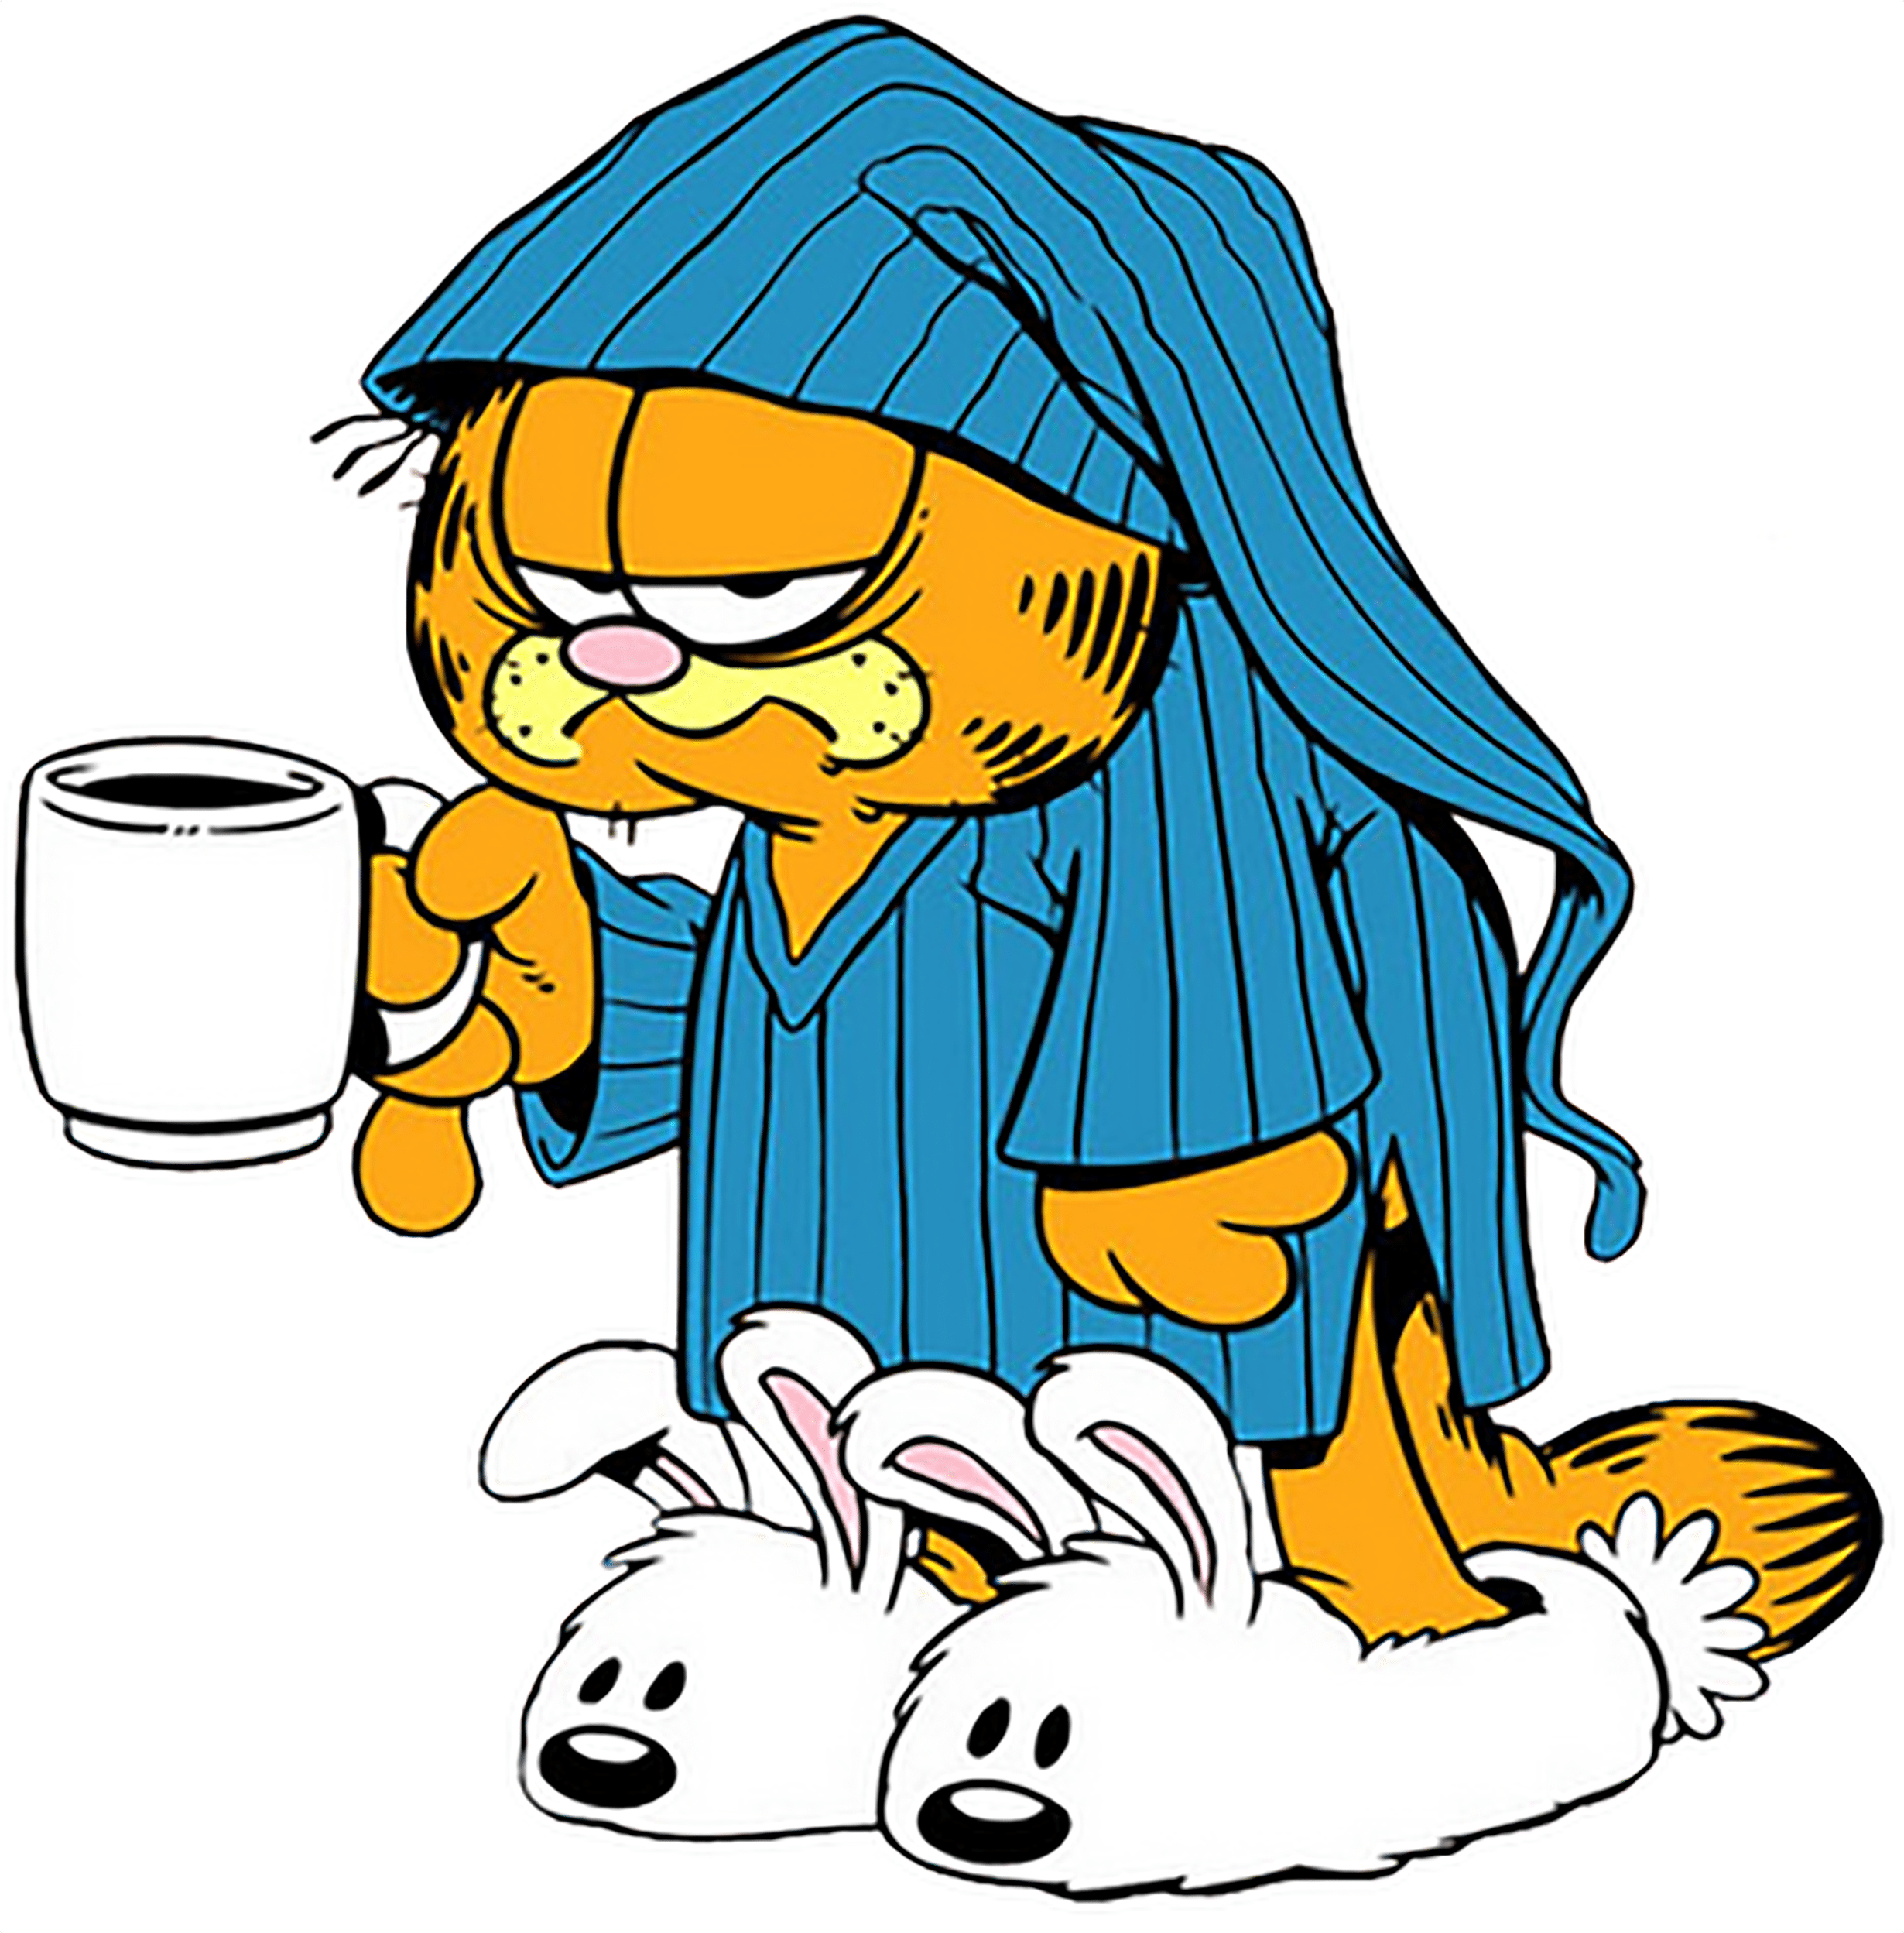 A4 A6. A5 Garfield Staring Iron On Transfer For Dark or Light Fabrics 